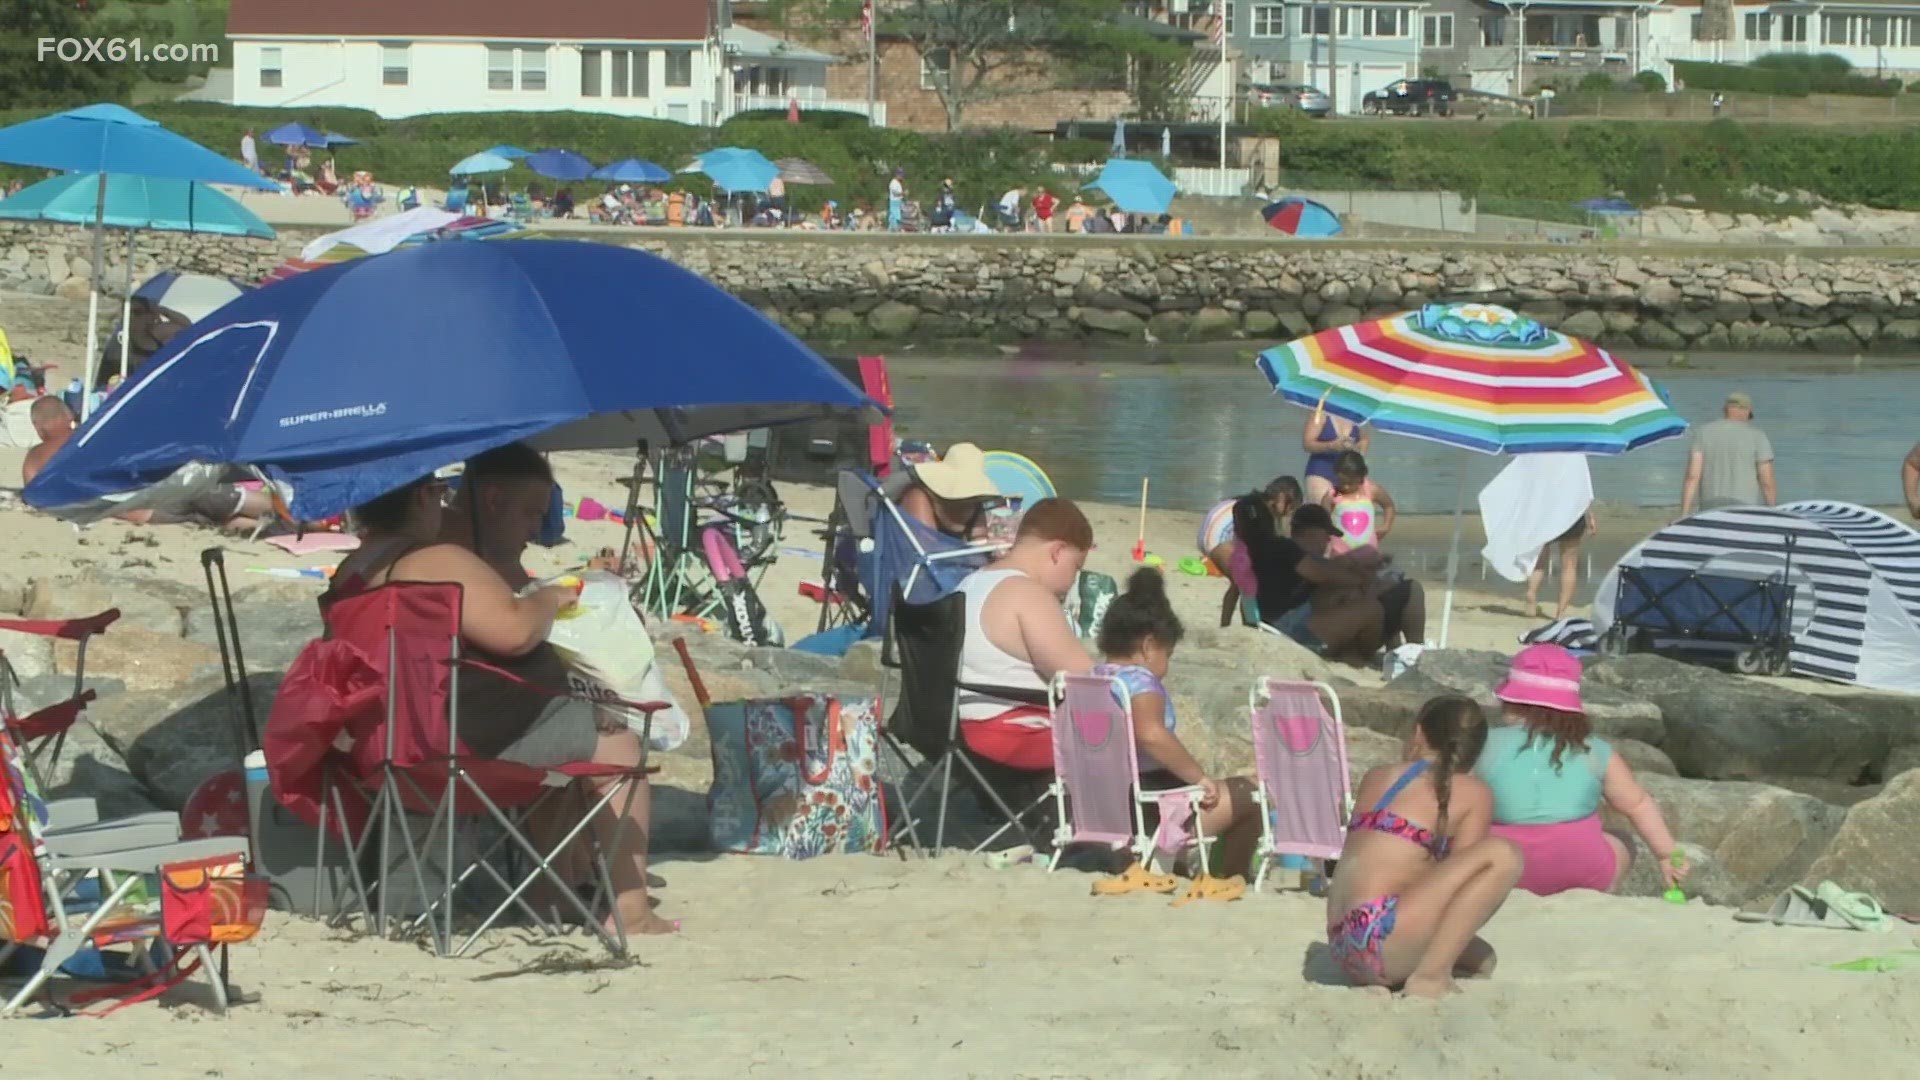 Residents go to Connecticut’s shoreline for Fourth of July